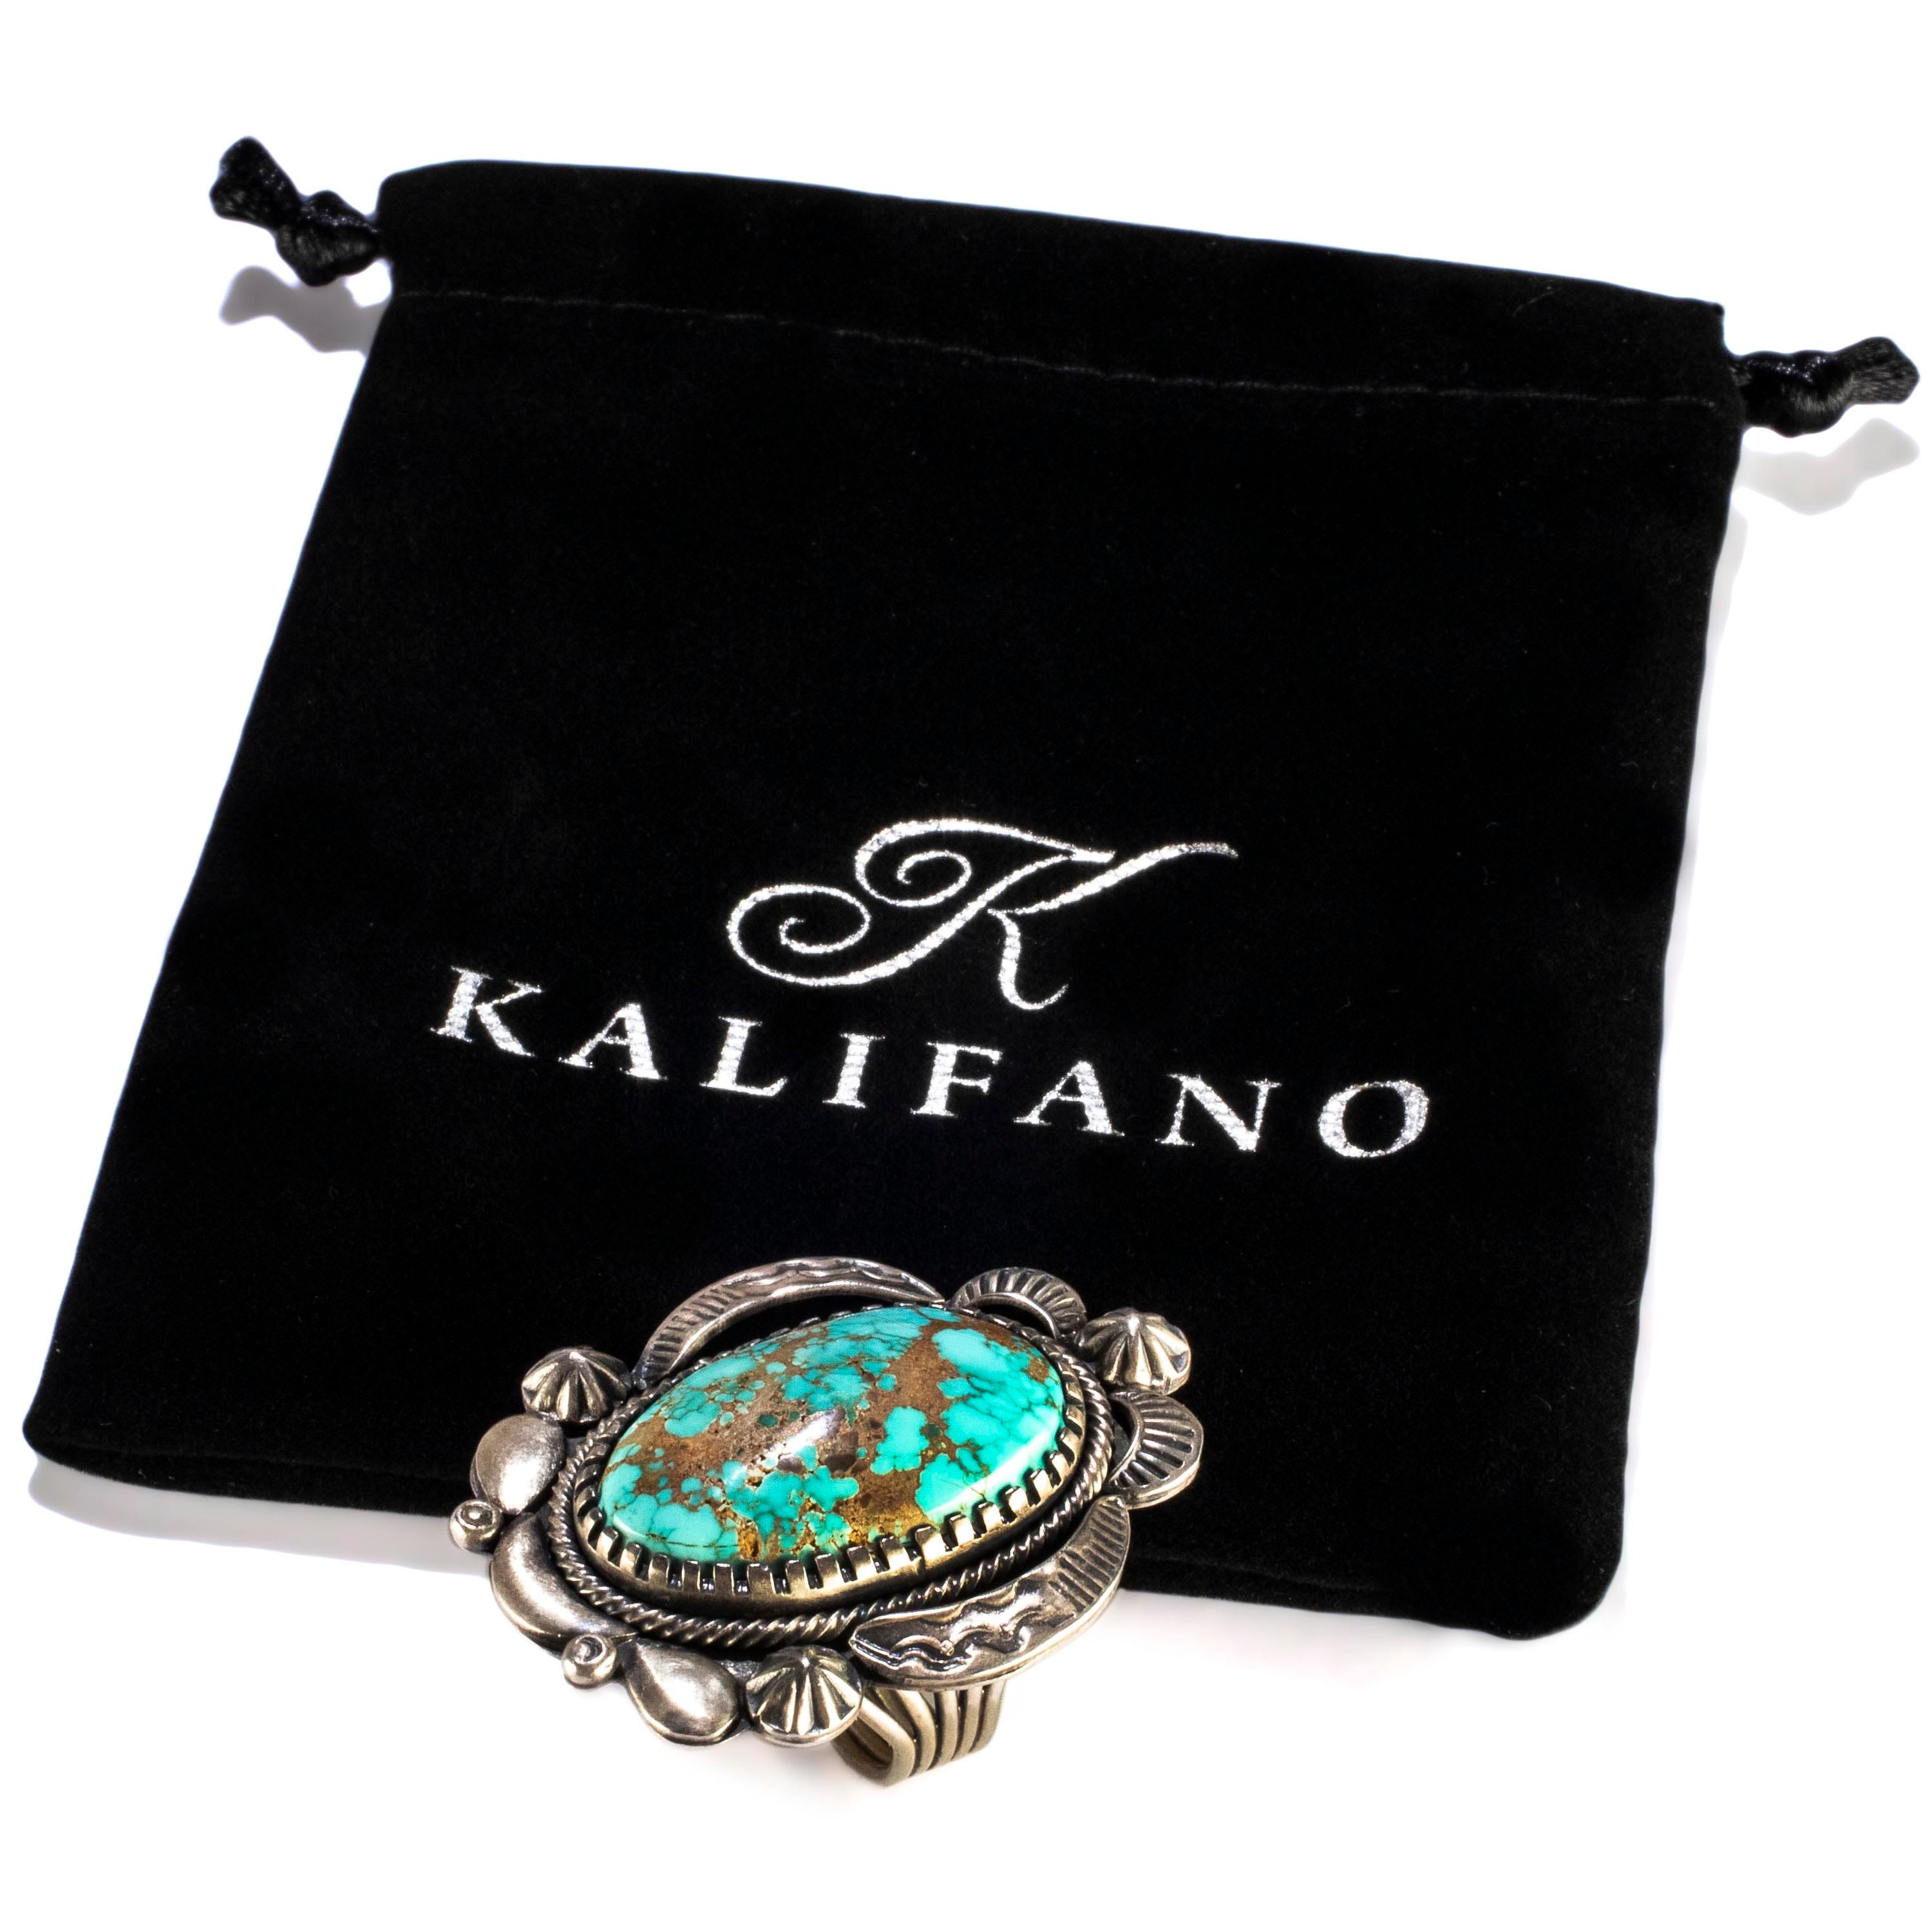 Kalifano Native American Jewelry 9.5 Marvin McReeves Navajo Carico Lake Turquoise USA Native American Made 925 Sterling Silver Ring NAR1500.021.95